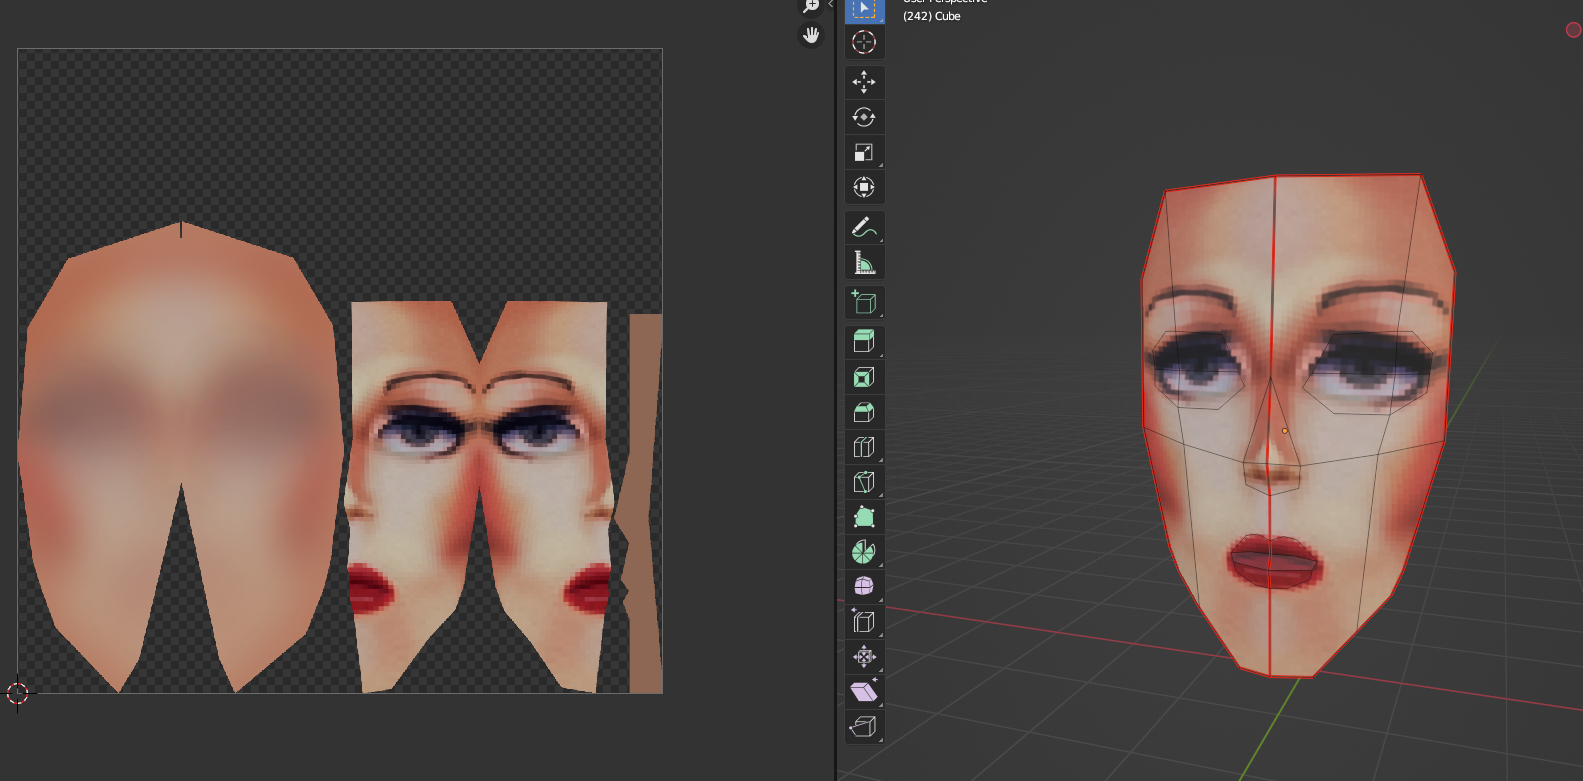 Screenshot of a 3D model of a mask I made in Blender. The face looks like 80s airbrush art. Dramatic eyeshadow and red lipstick